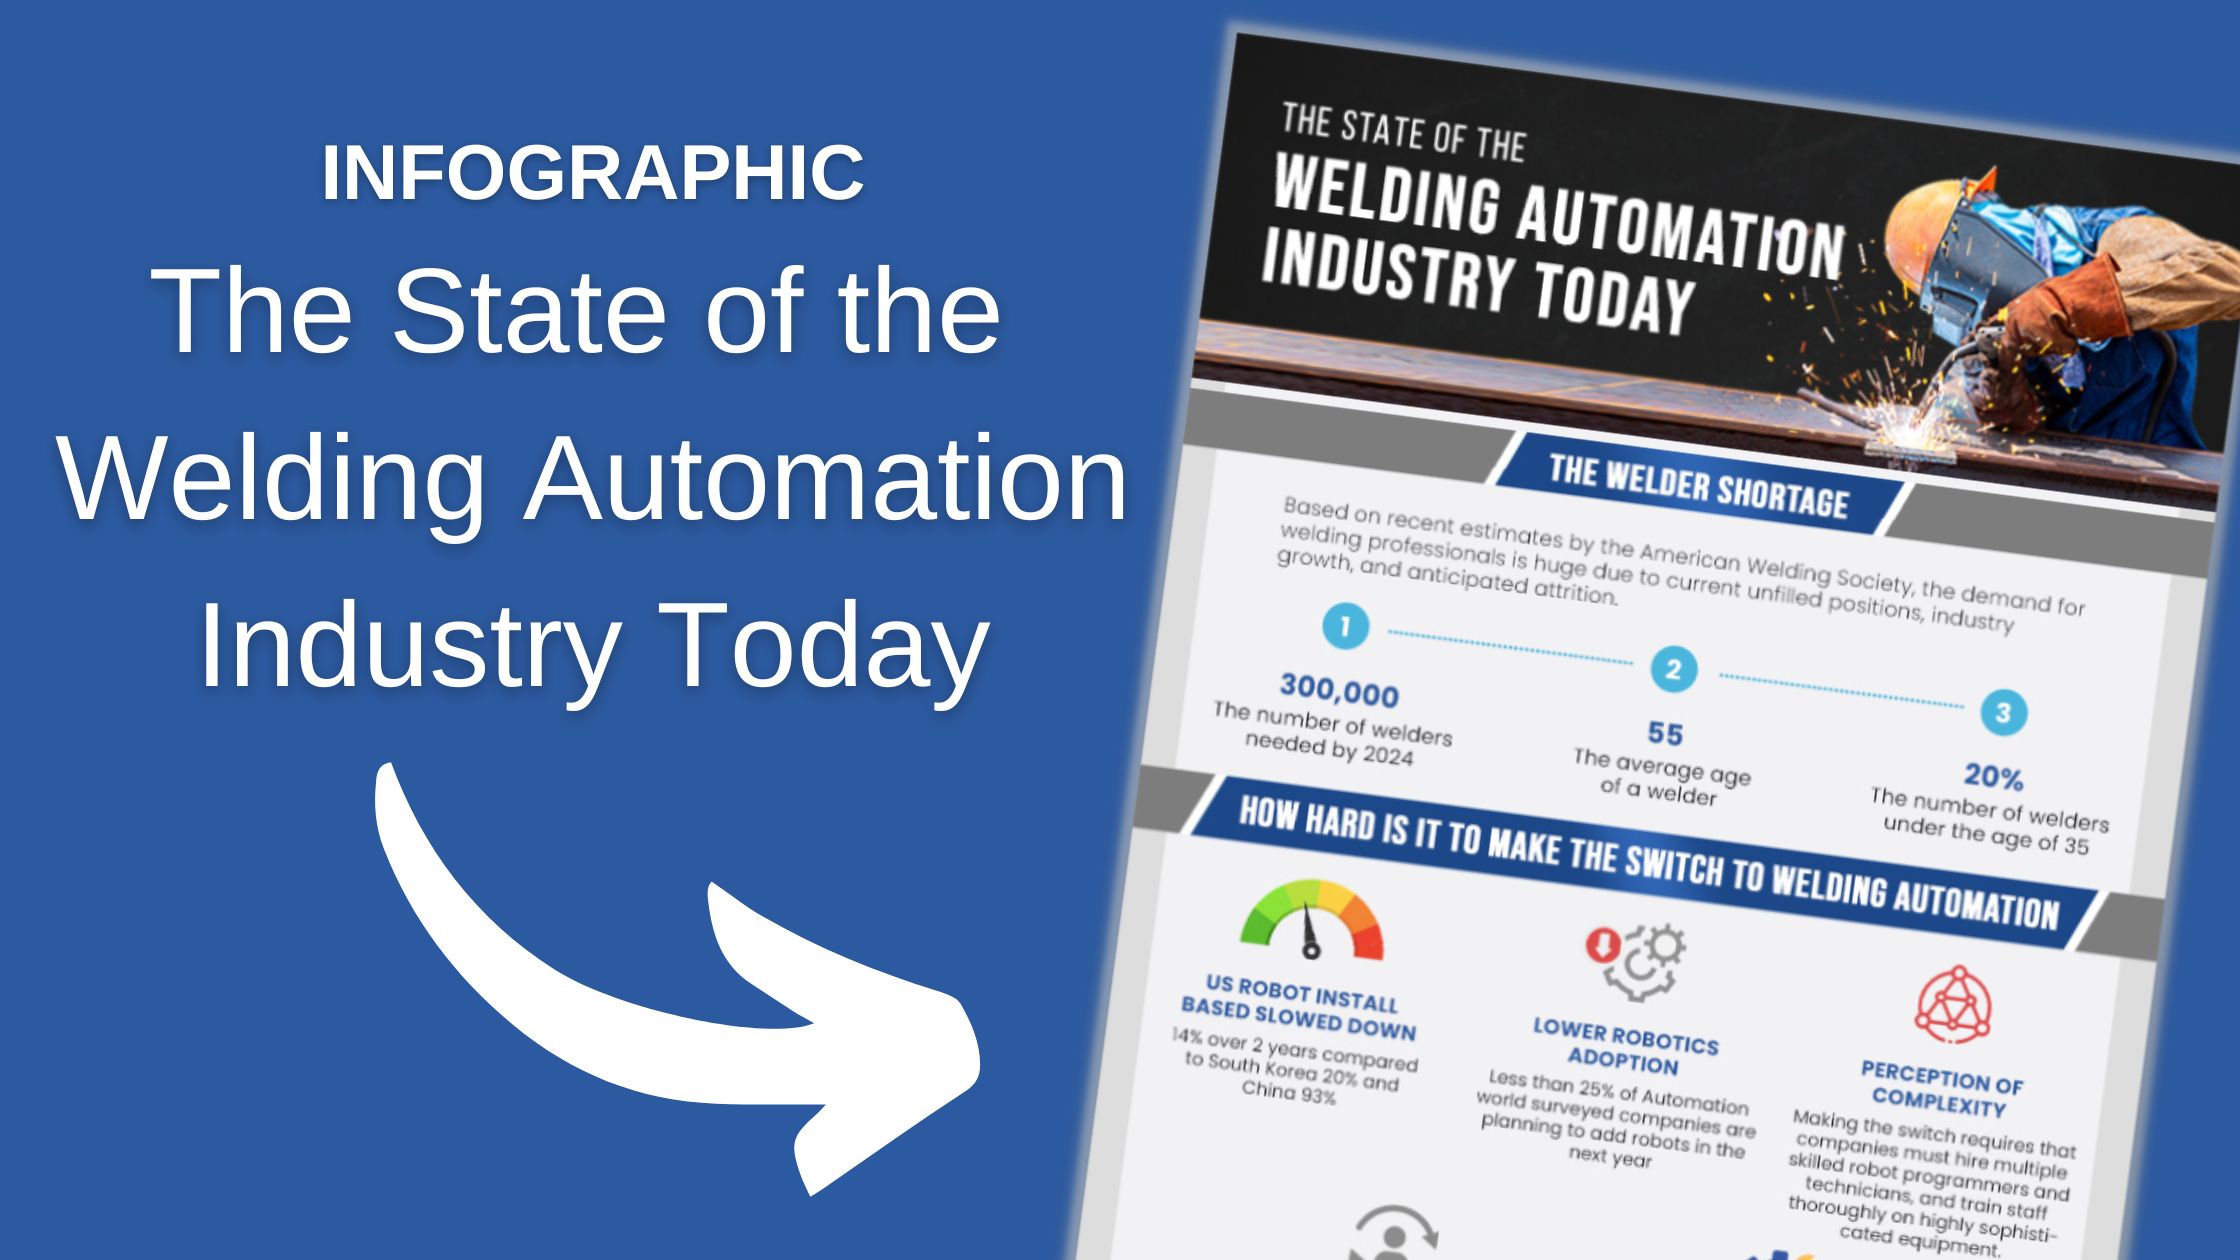 INFOGRAPHIC | The State of the Welding Automation Industry Today